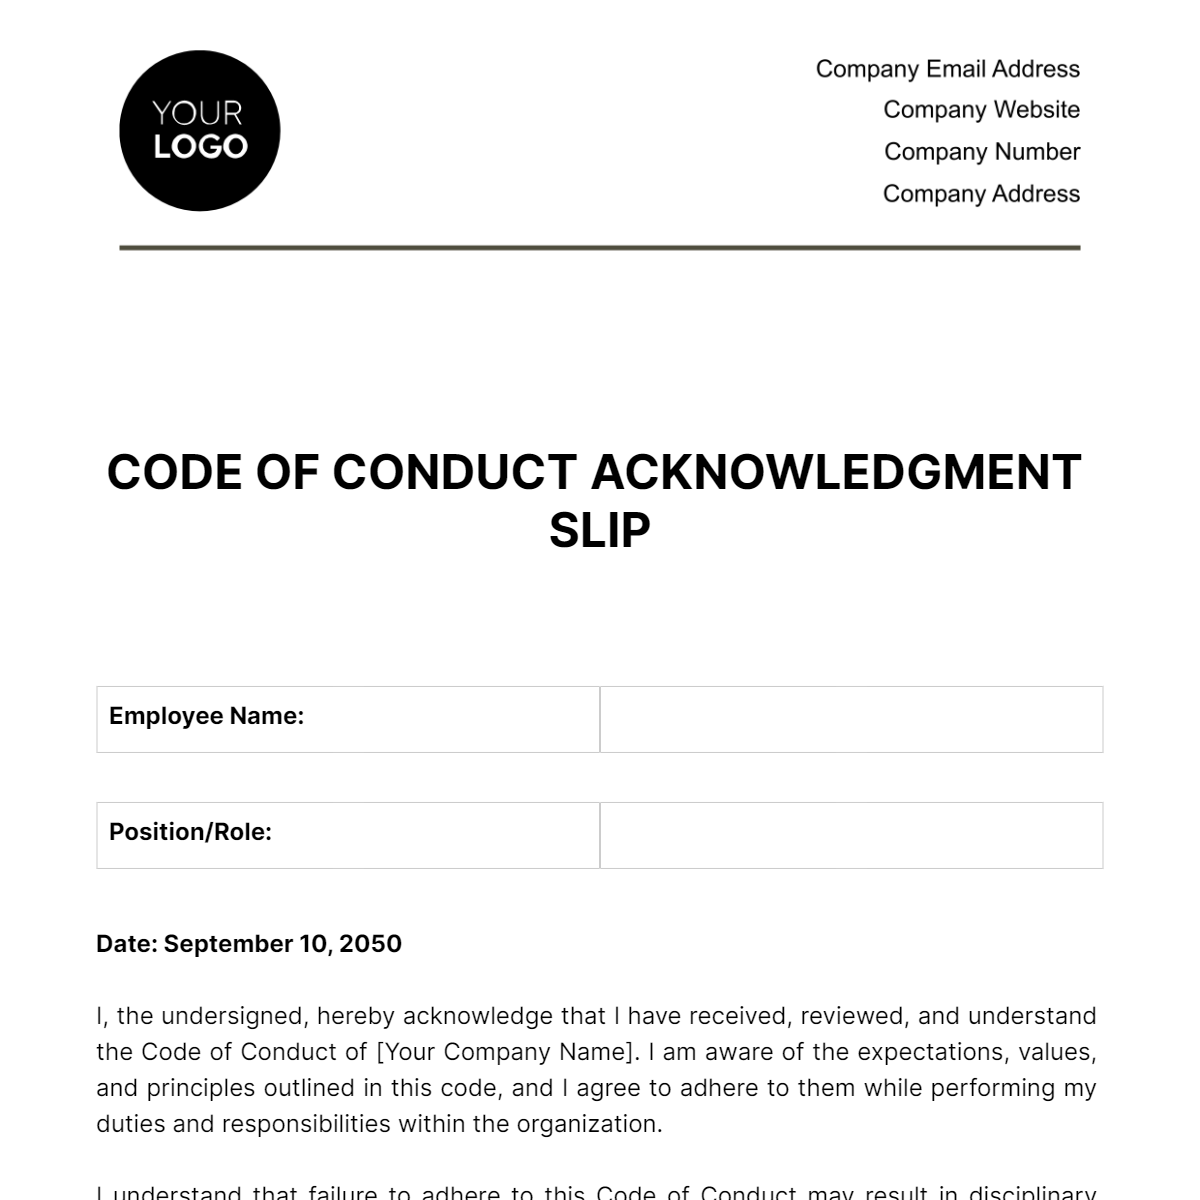 Free Code of Conduct Acknowledgment Slip HR Template